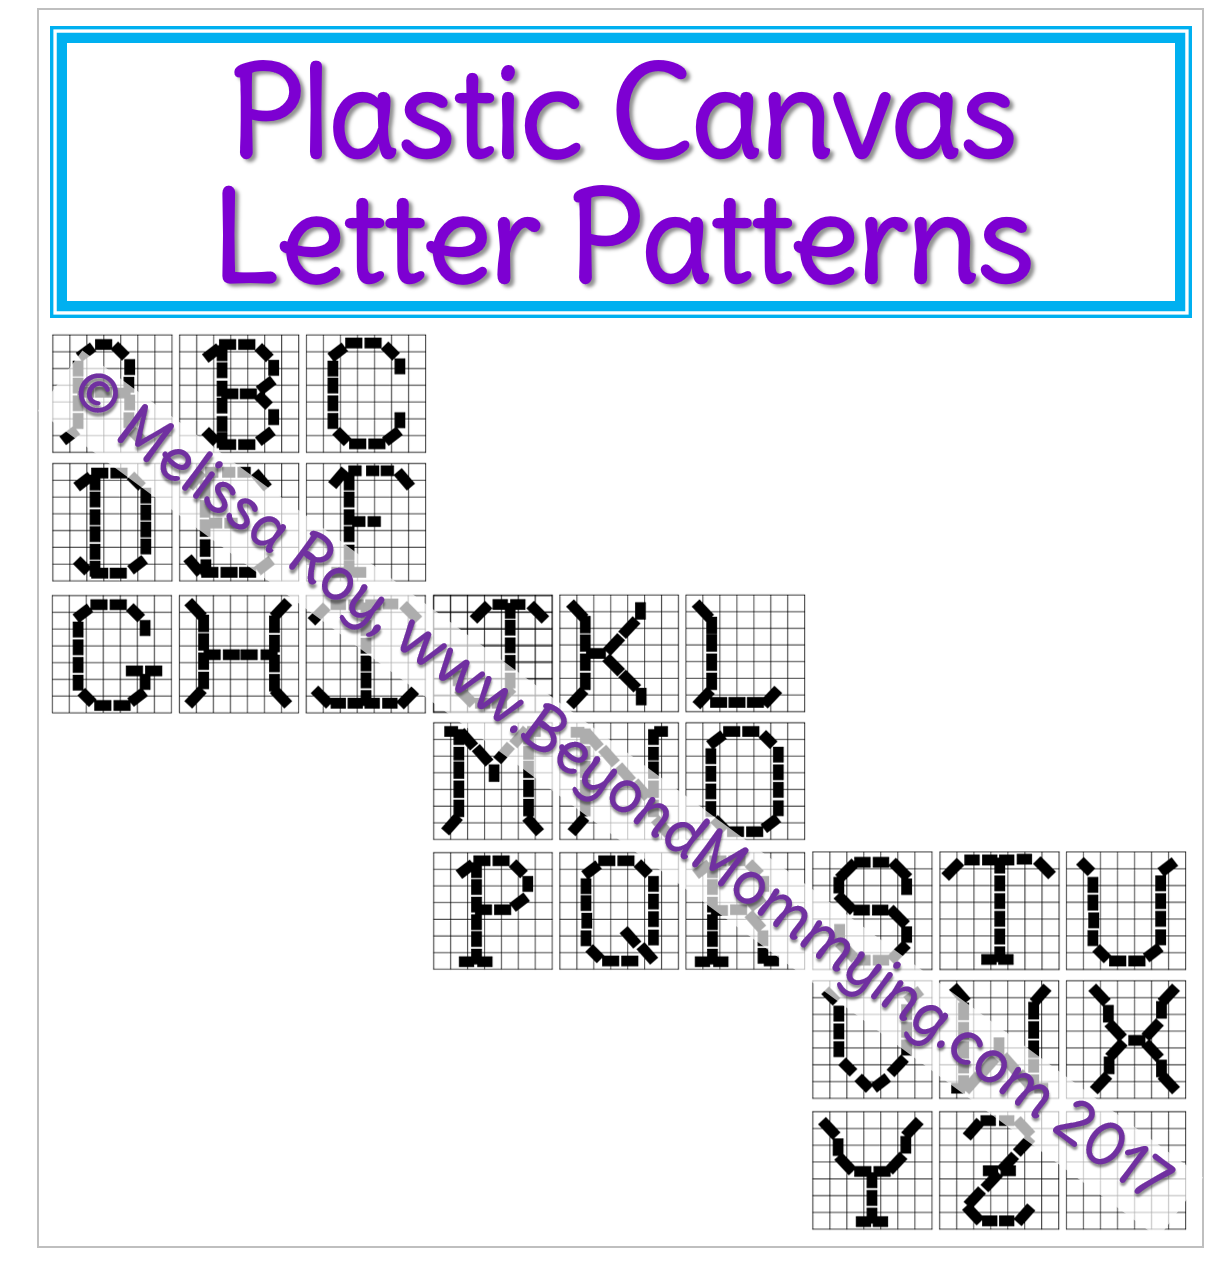 ways-to-use-plastic-canvas-and-printable-plastic-canvas-letter-patterns